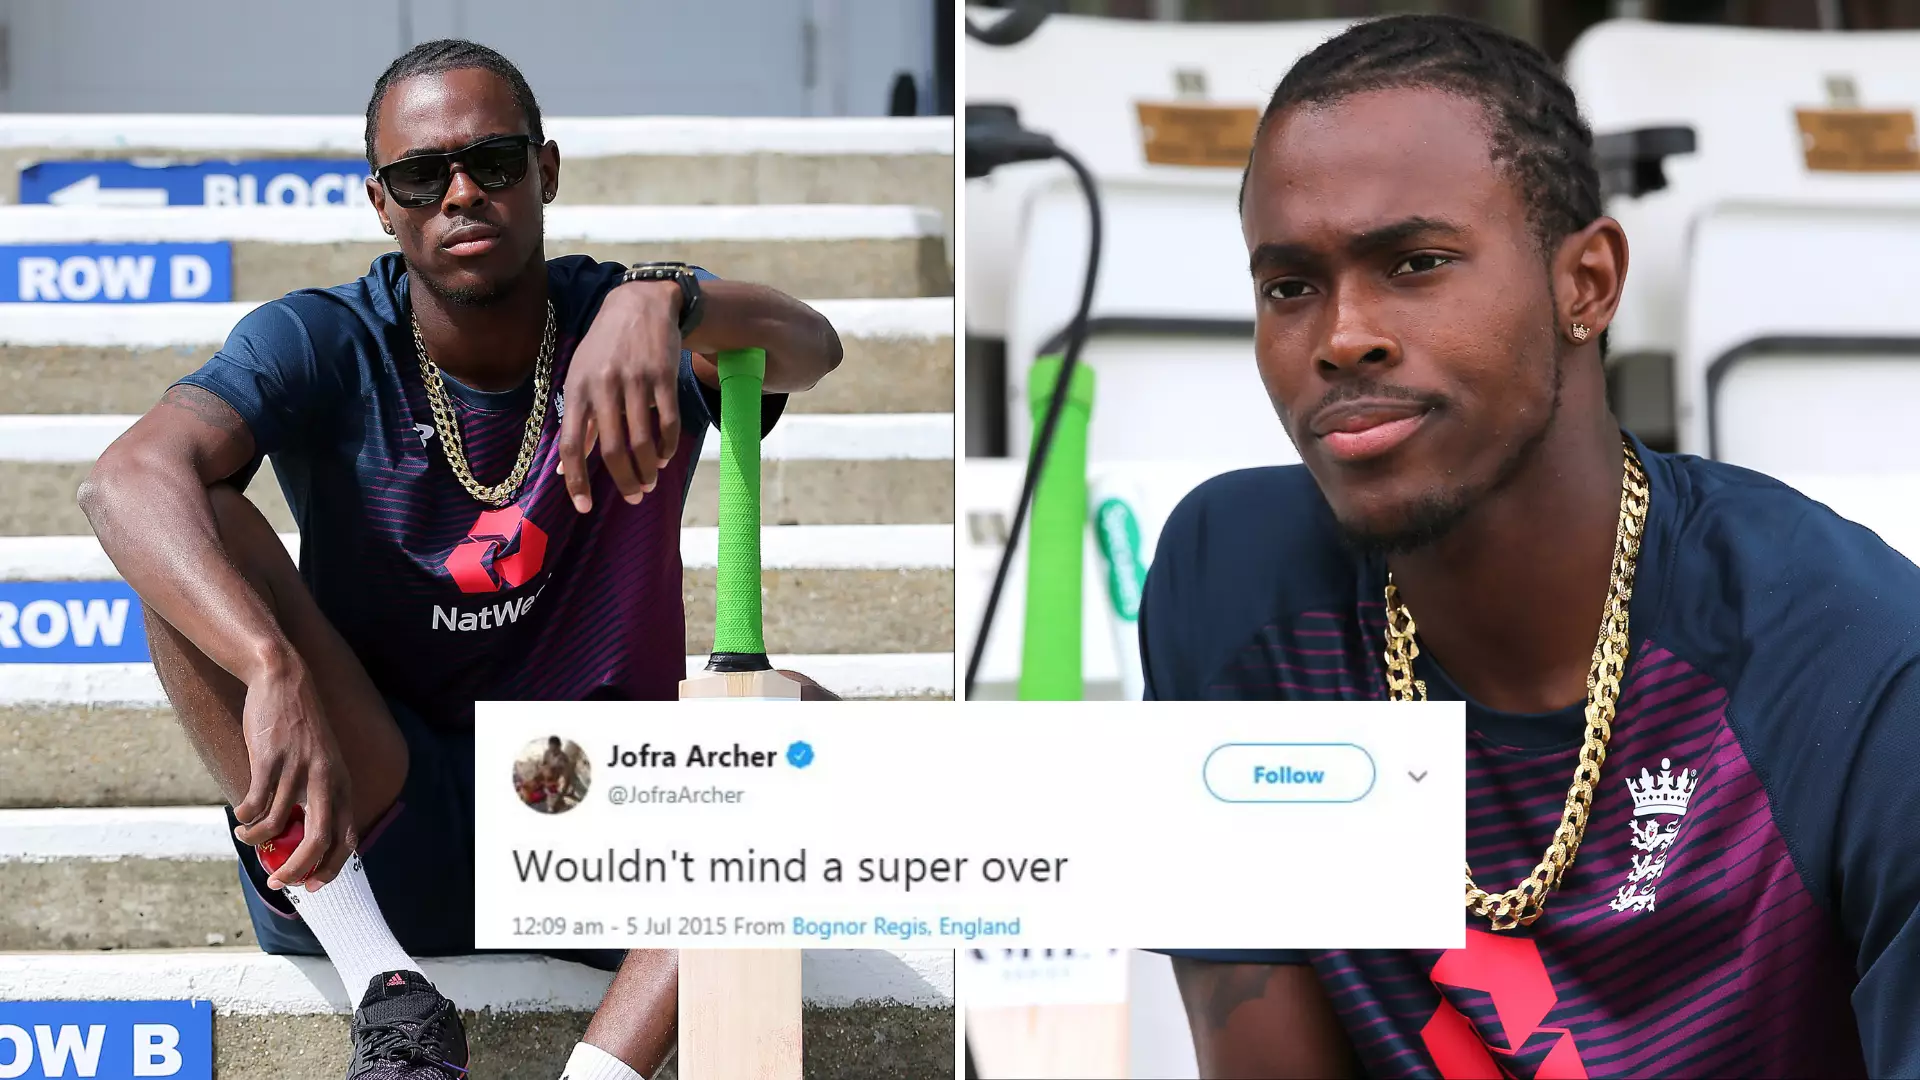 Jofra Archer Exclusive: 'You Definitely Get A Good Laugh Out Of My Tweets'